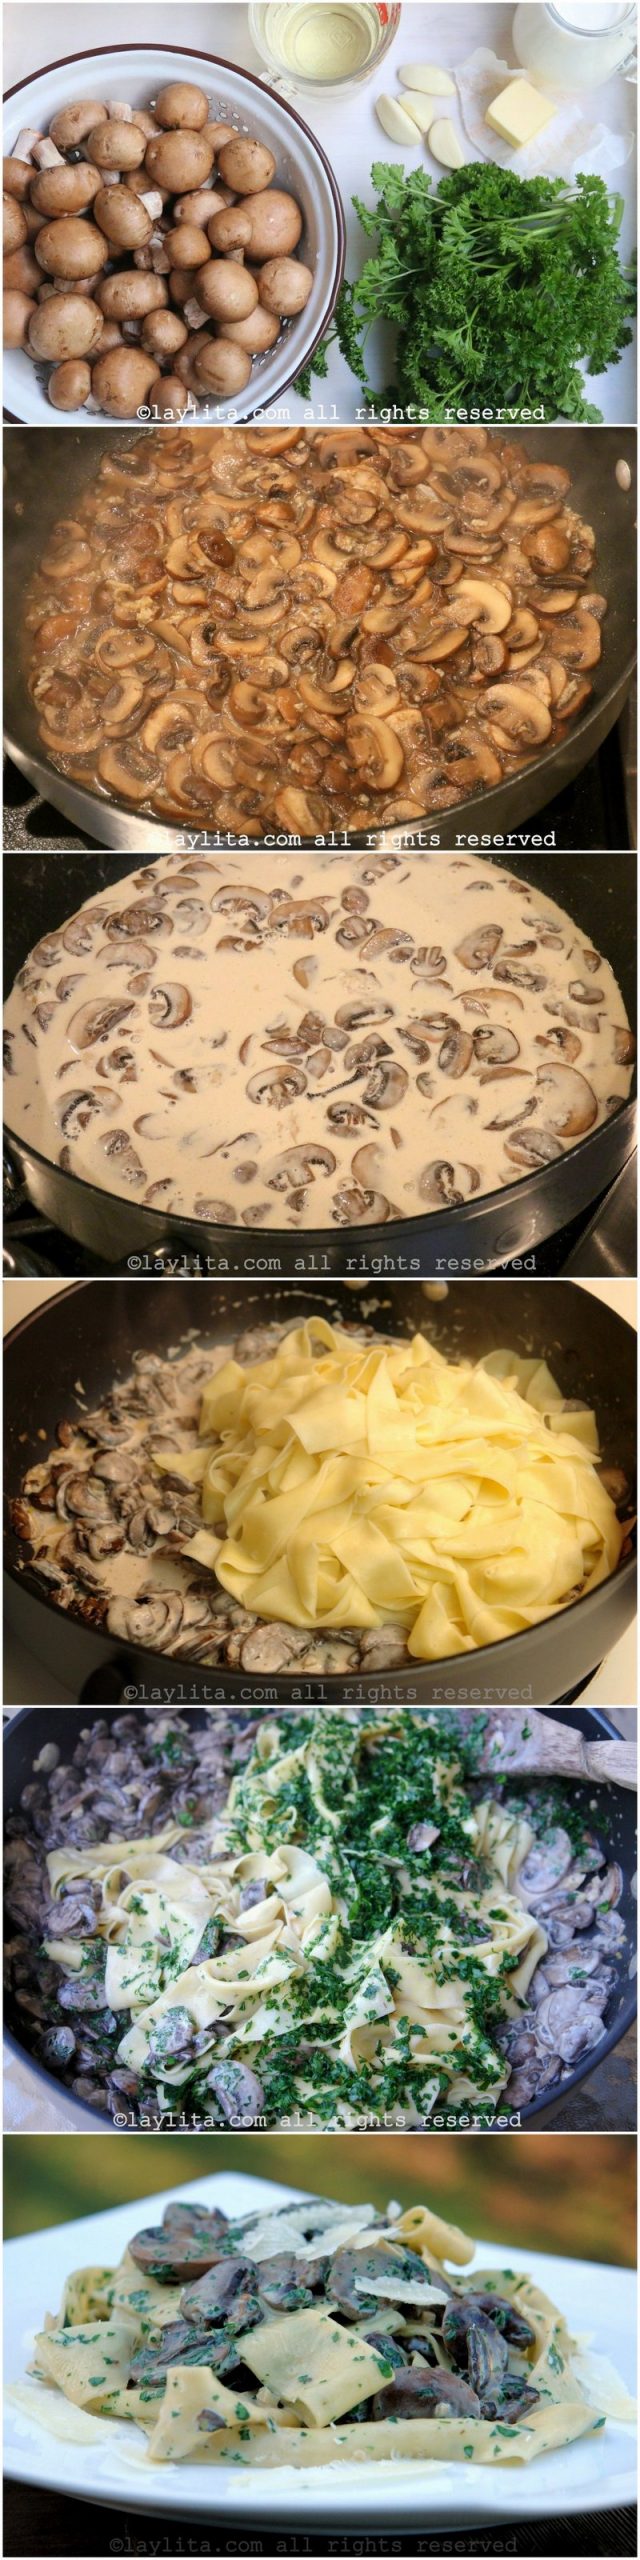 How to make pasta with a creamy mushroom sauce